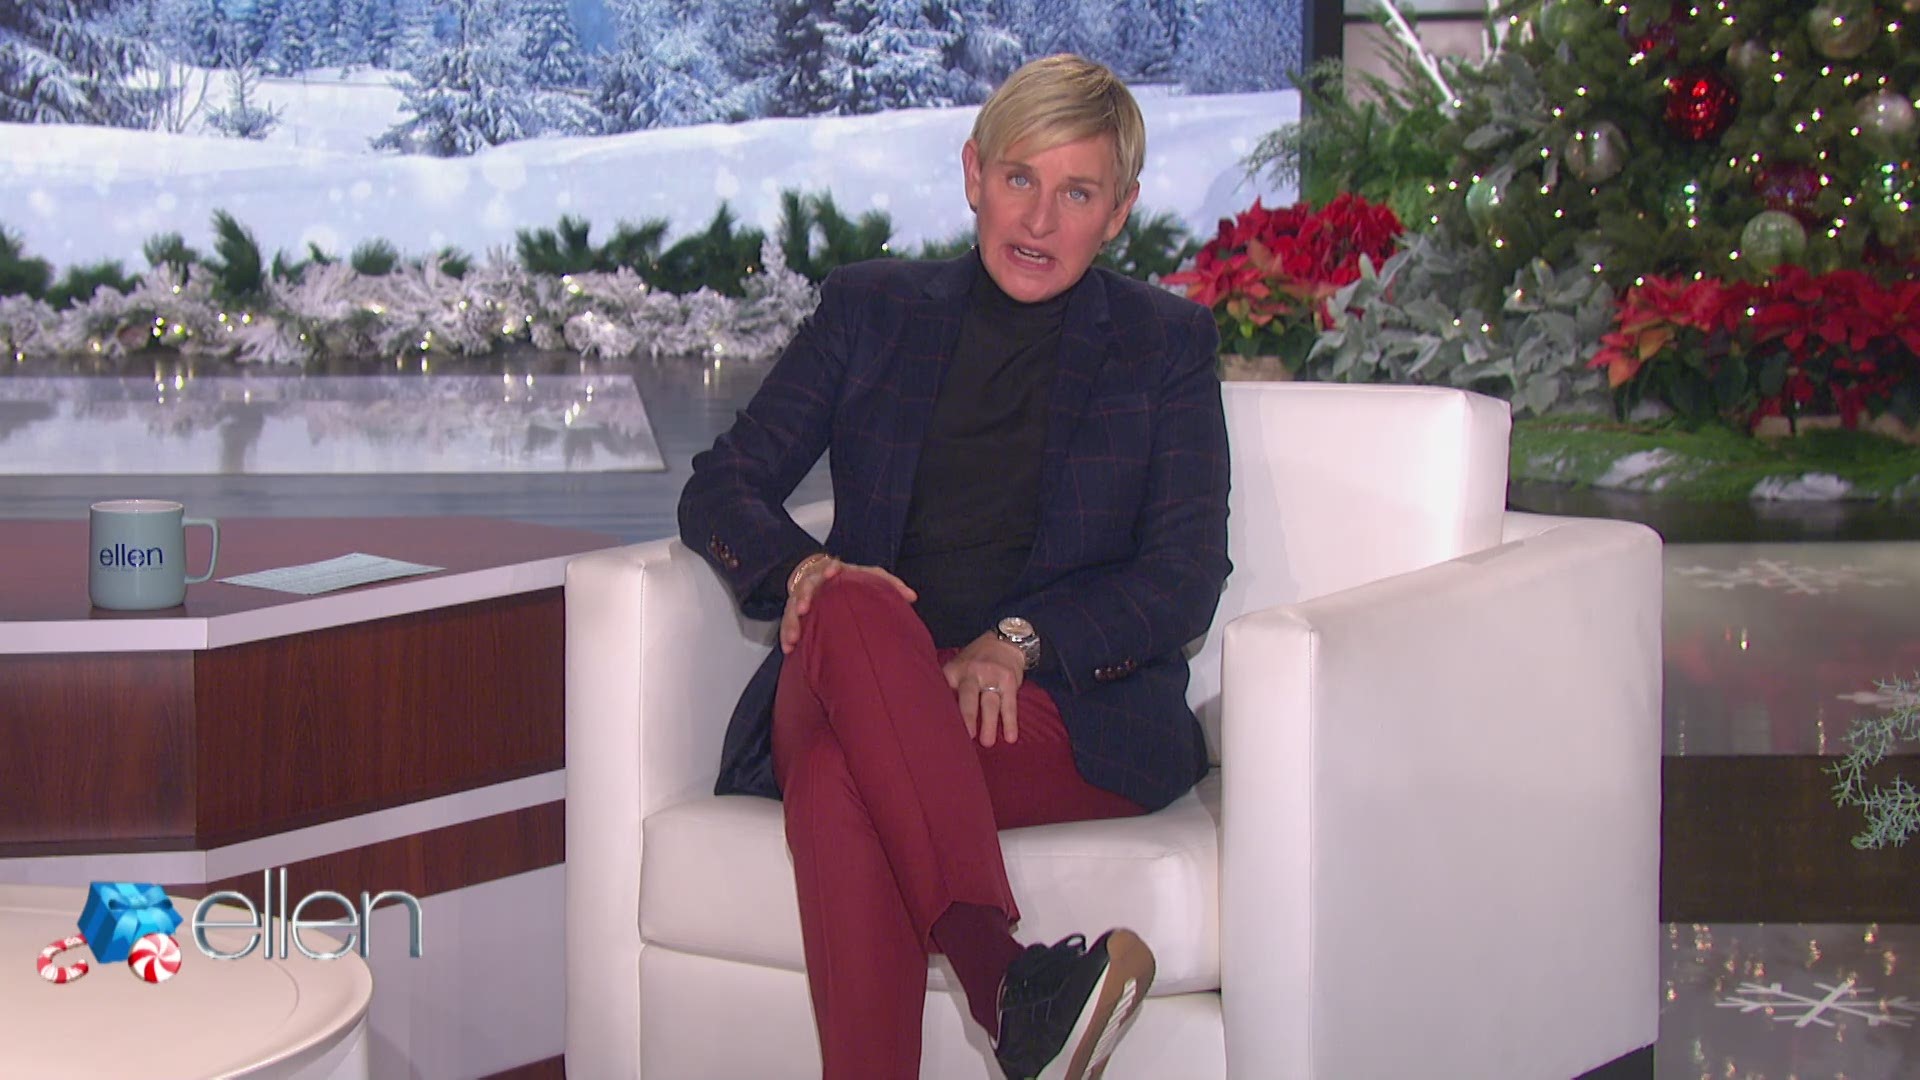 Ellen Gifts Deserving Family with Two Brand-New Cars!